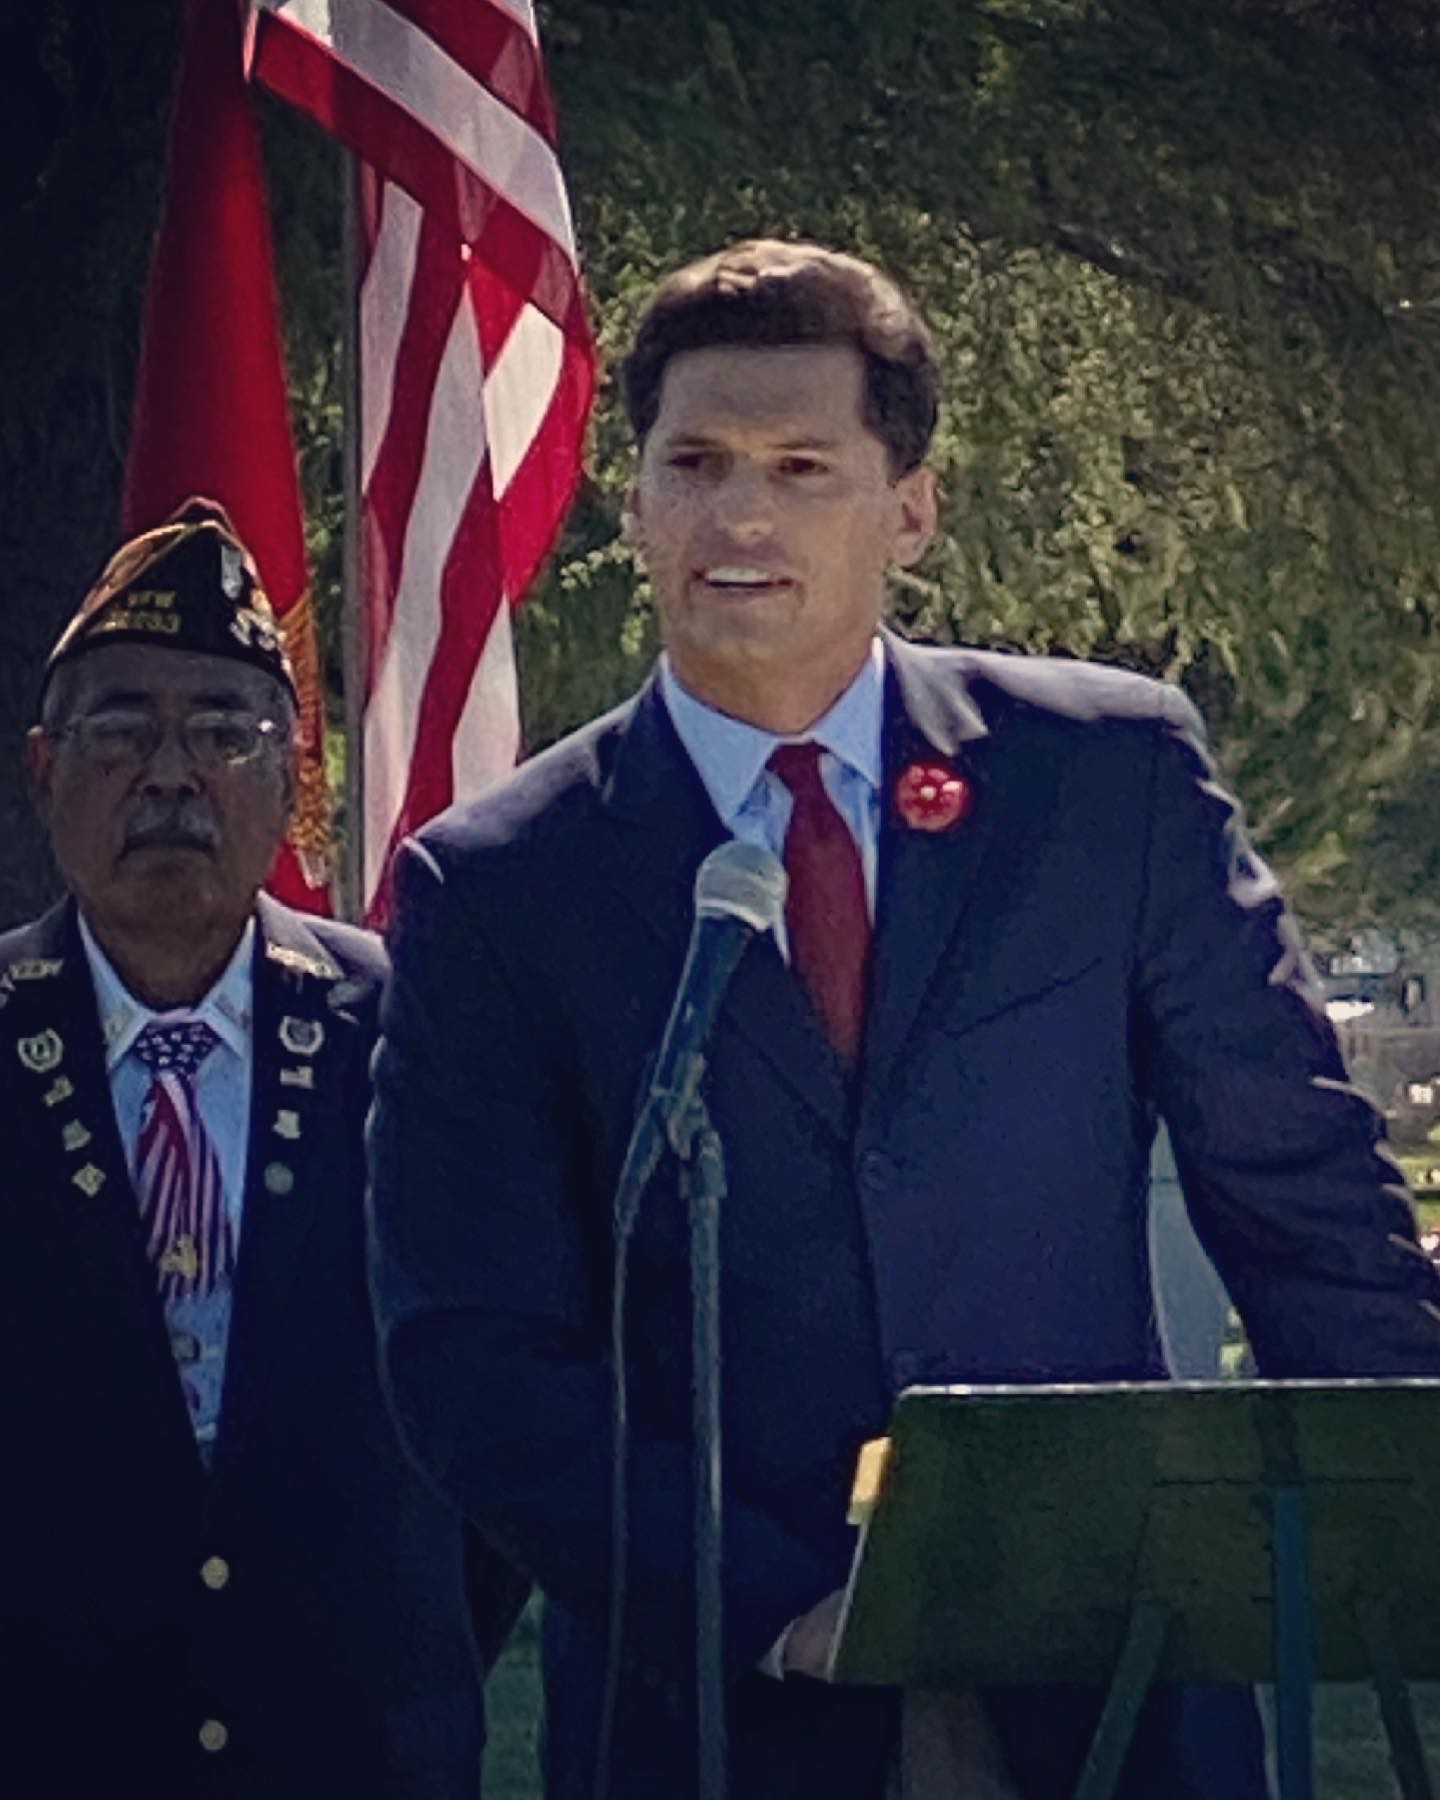 Channce Condit speaking at a podium at the Ceres Memorial Day Ceremony in 2021